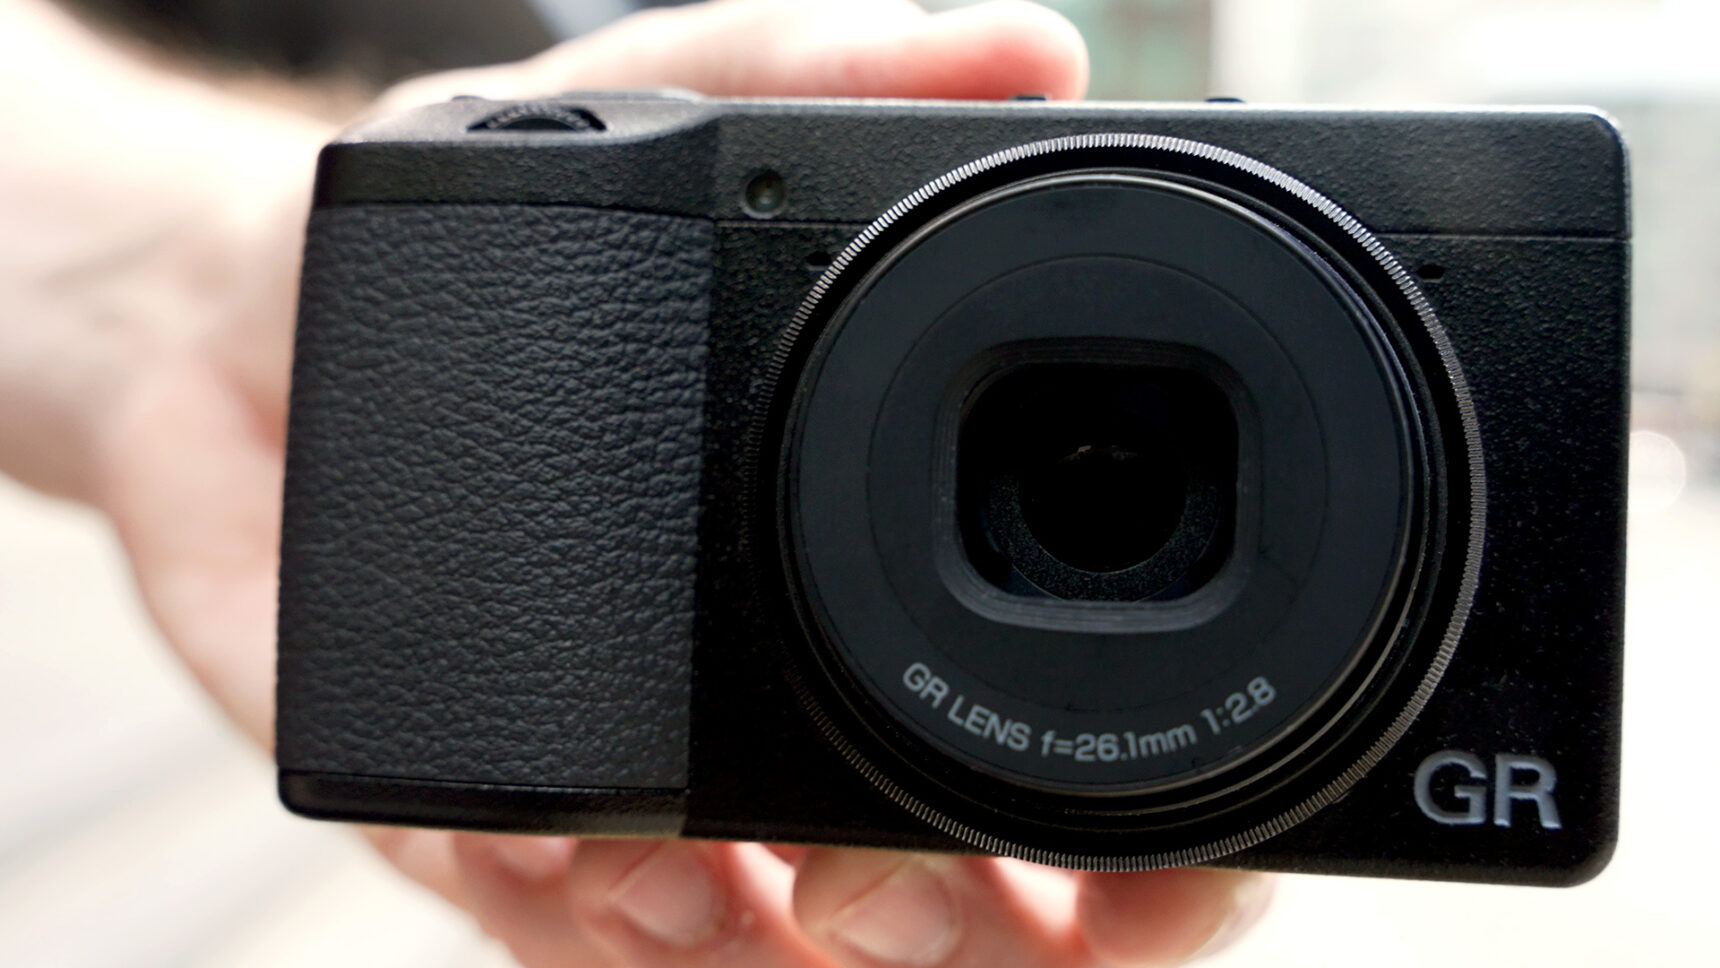 This is the Ricoh GR IIIx.